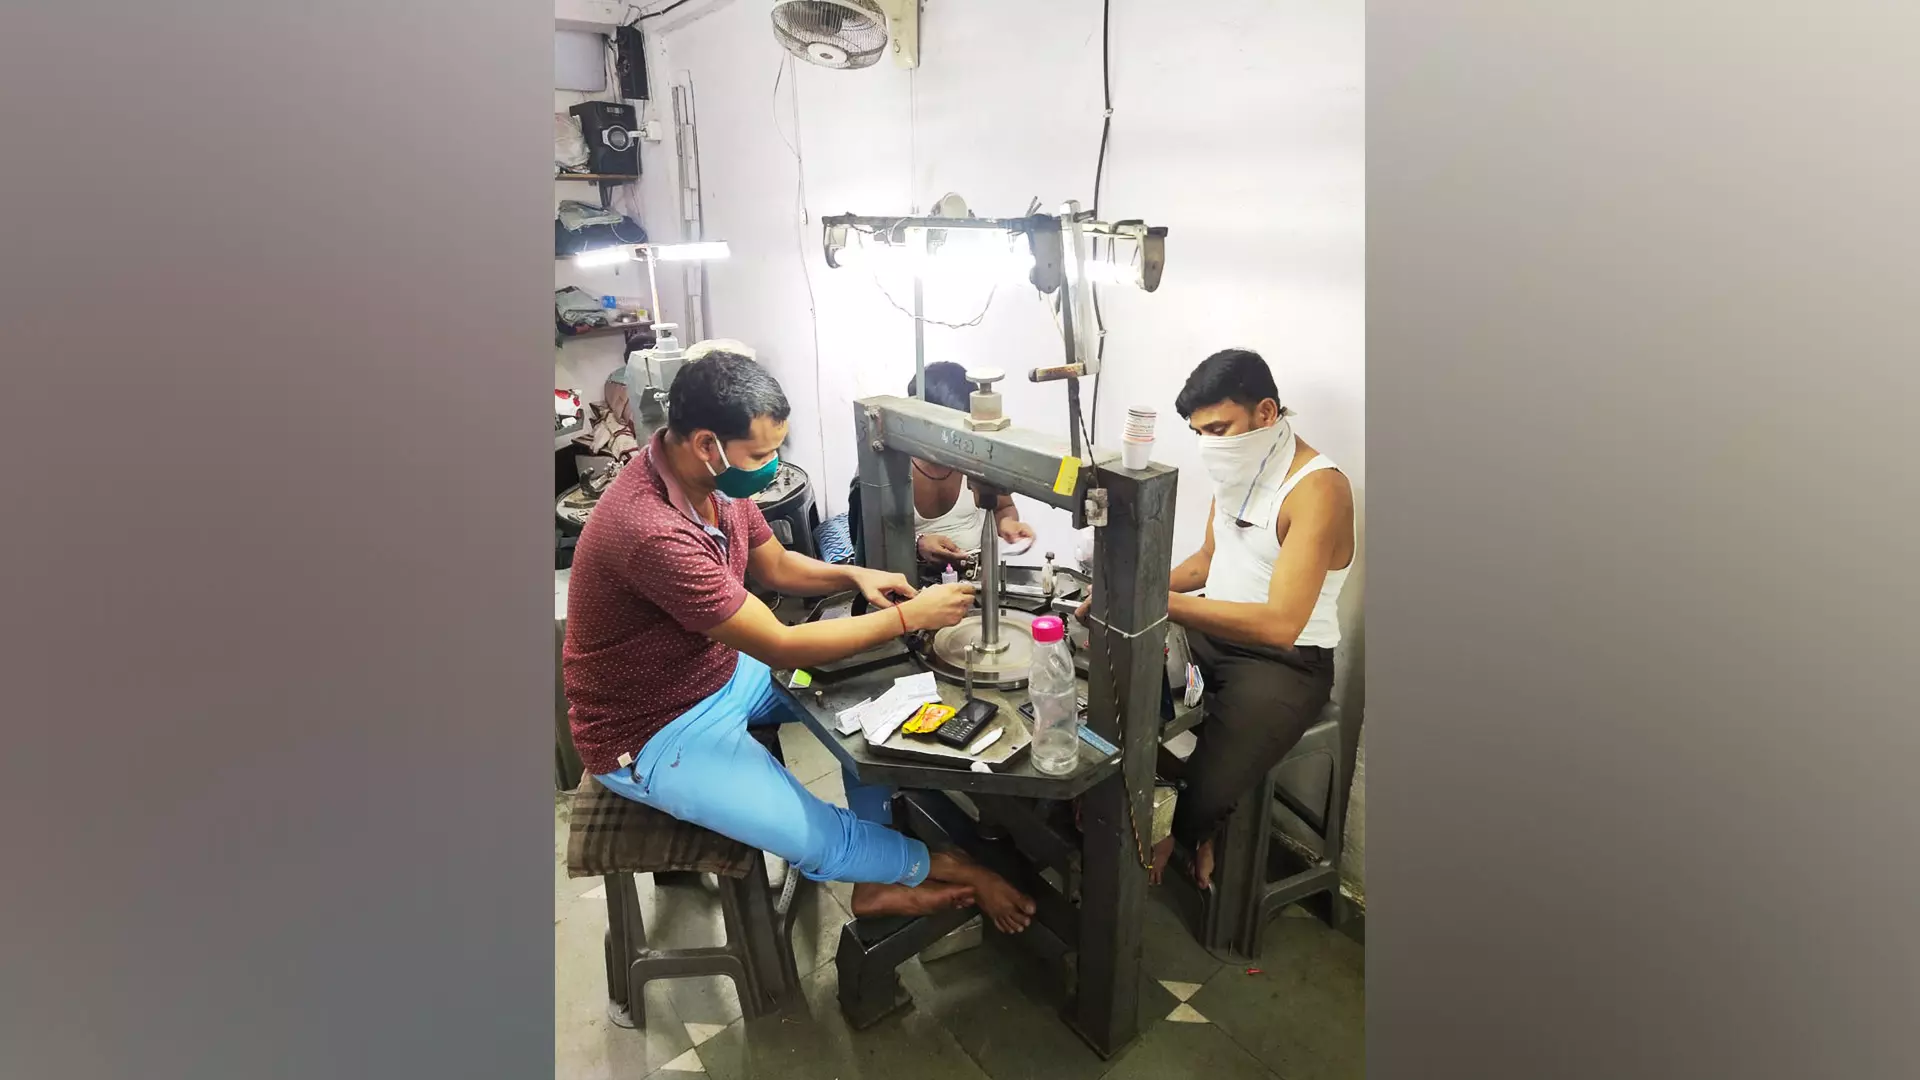 While the larger polishing factories are often equipped with necessities such as air conditioning units and fixed wages, the small and medium factories have no ventilation, toilets and workers often have to sleep in the factory to avail additional paid working hours.